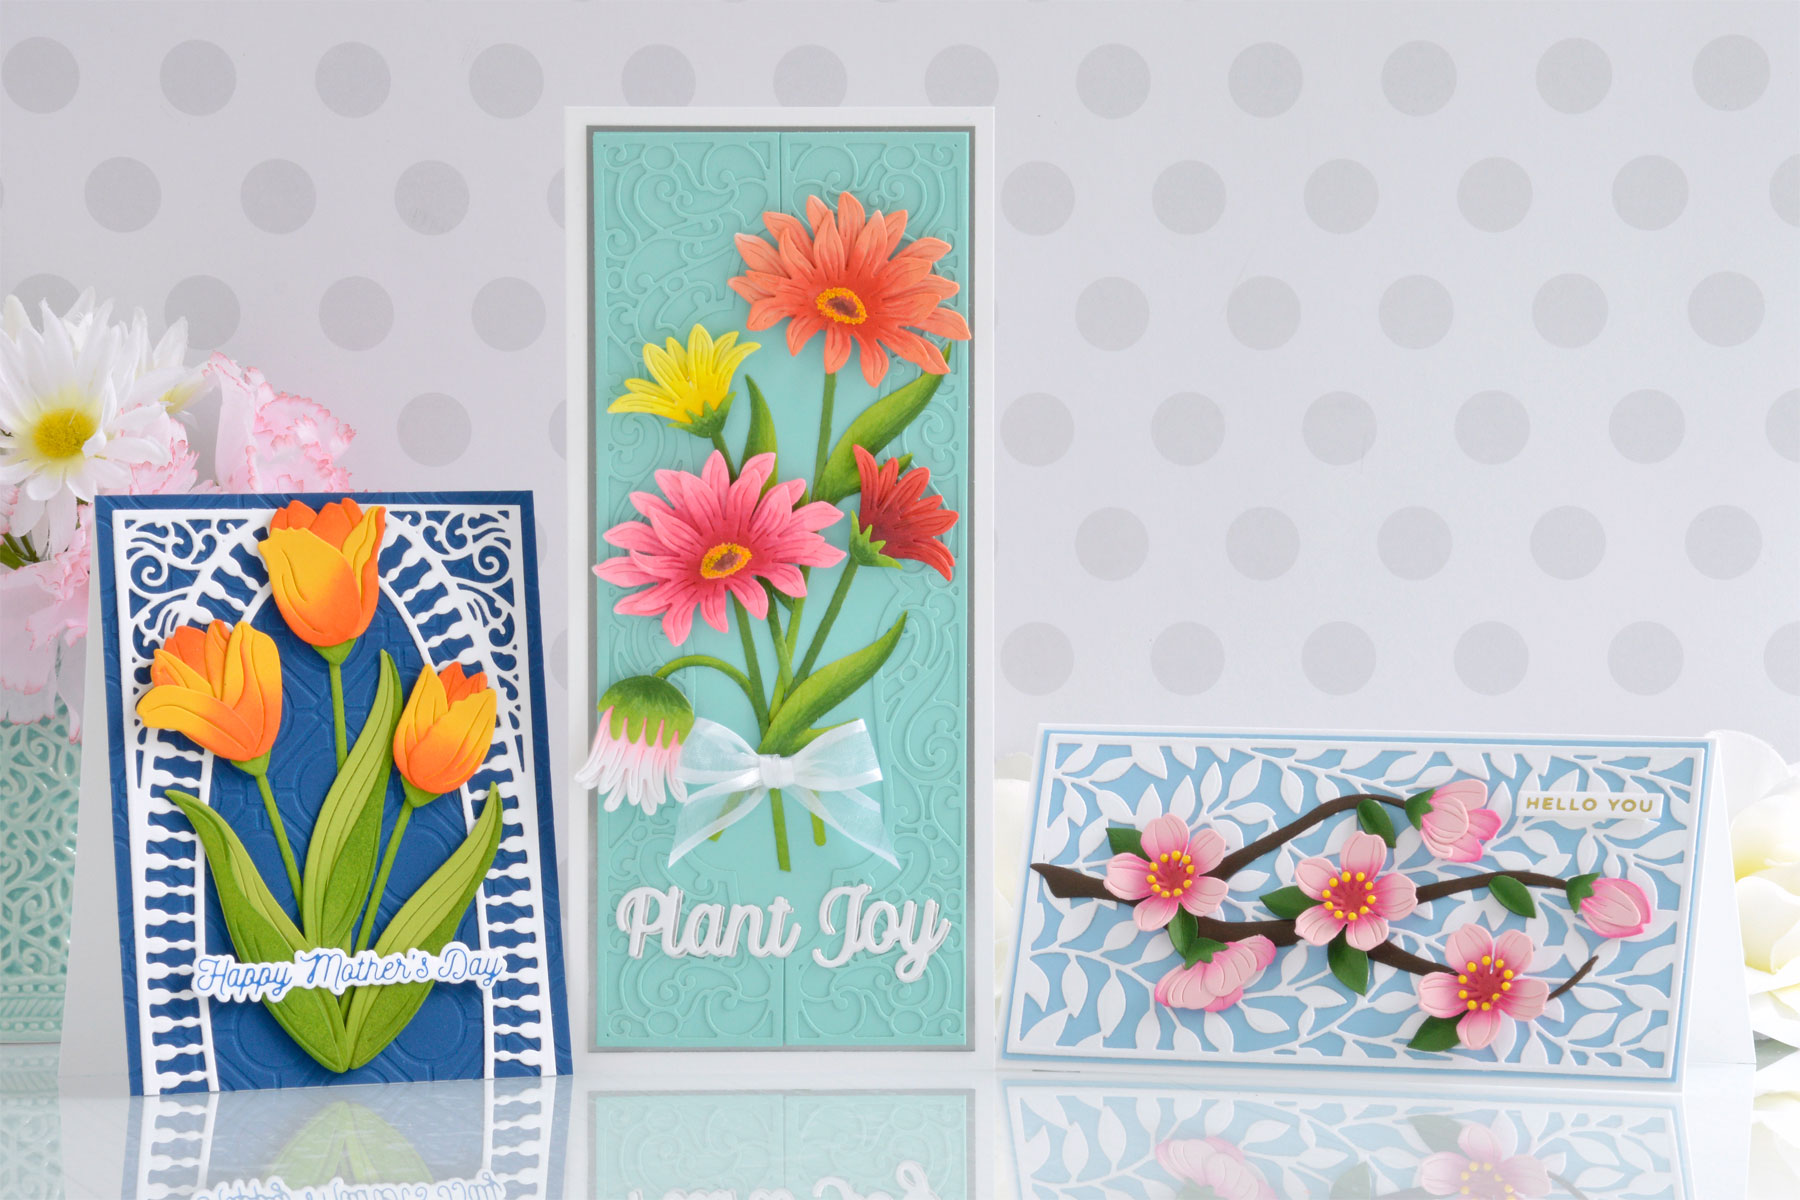 Floral Phrases handmade one layer cards cost just pennies apiece!